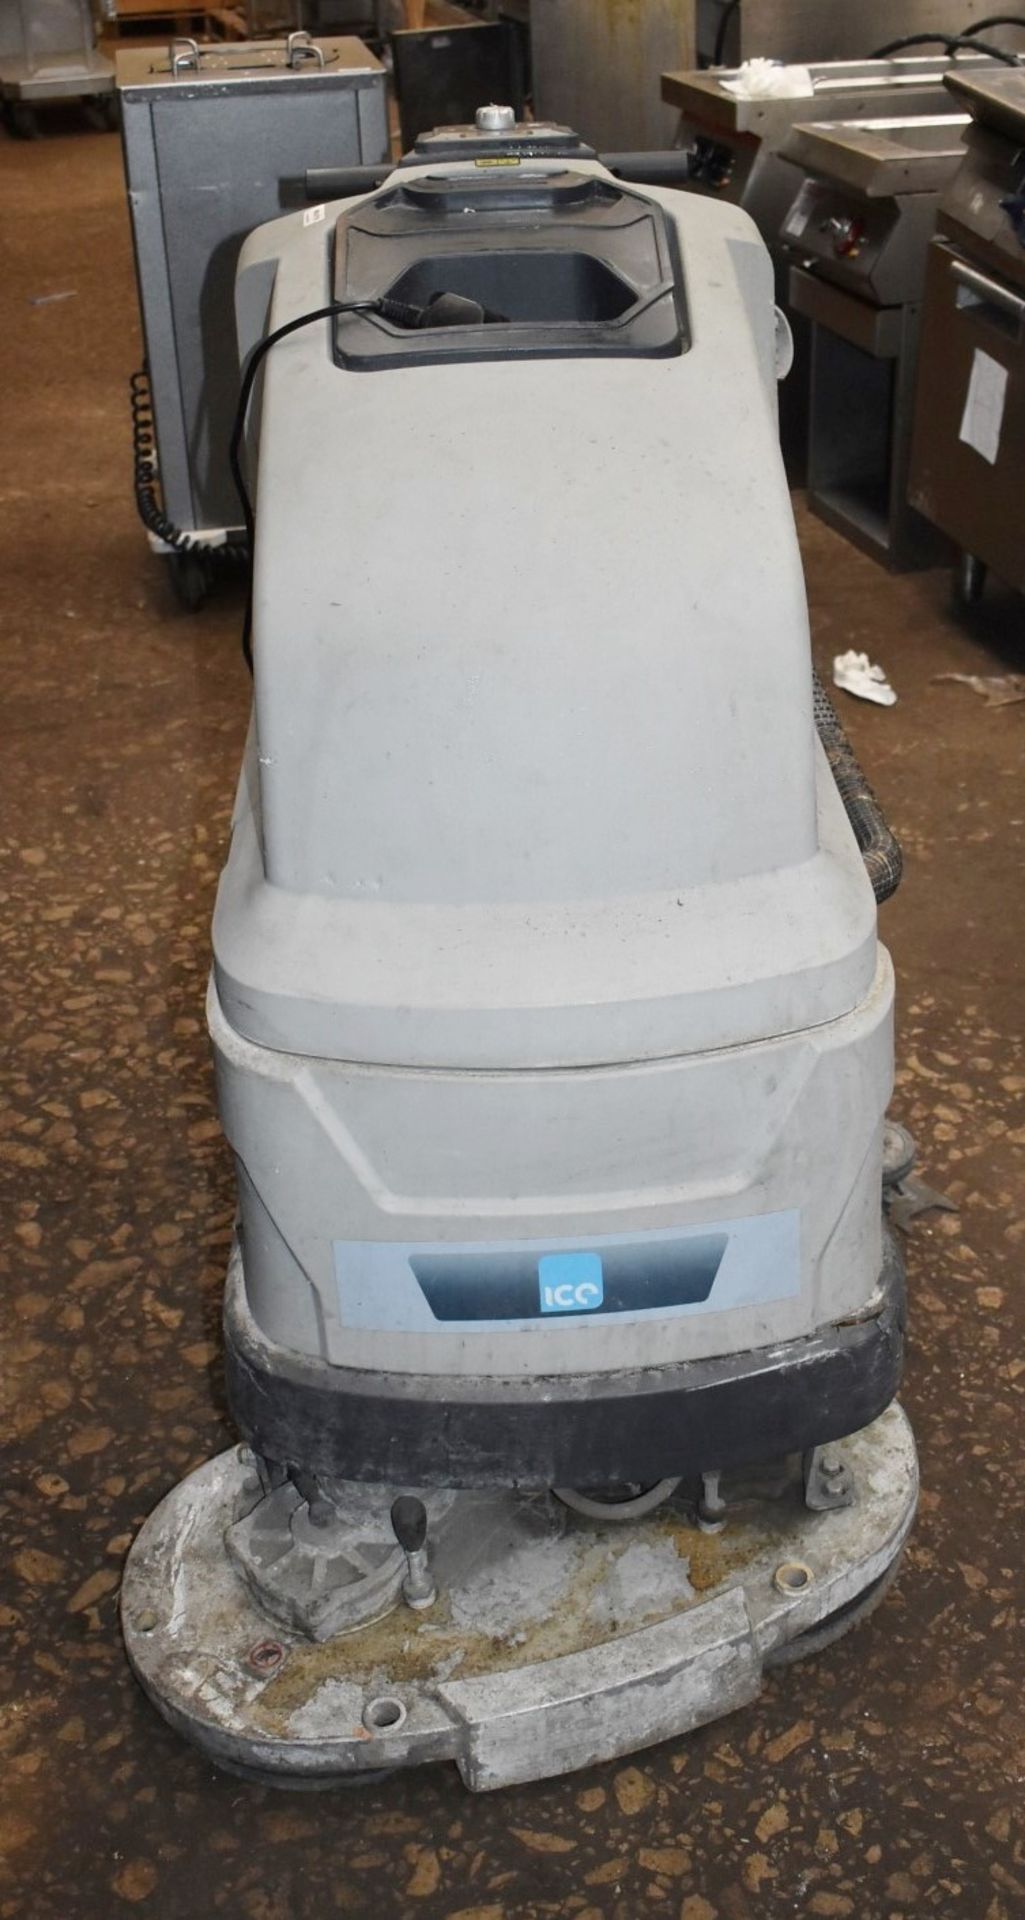 1 x Ice Scrub 65D Commercial Floor Scrubber Dryer - Recently Removed From a Supermarket - Image 4 of 16